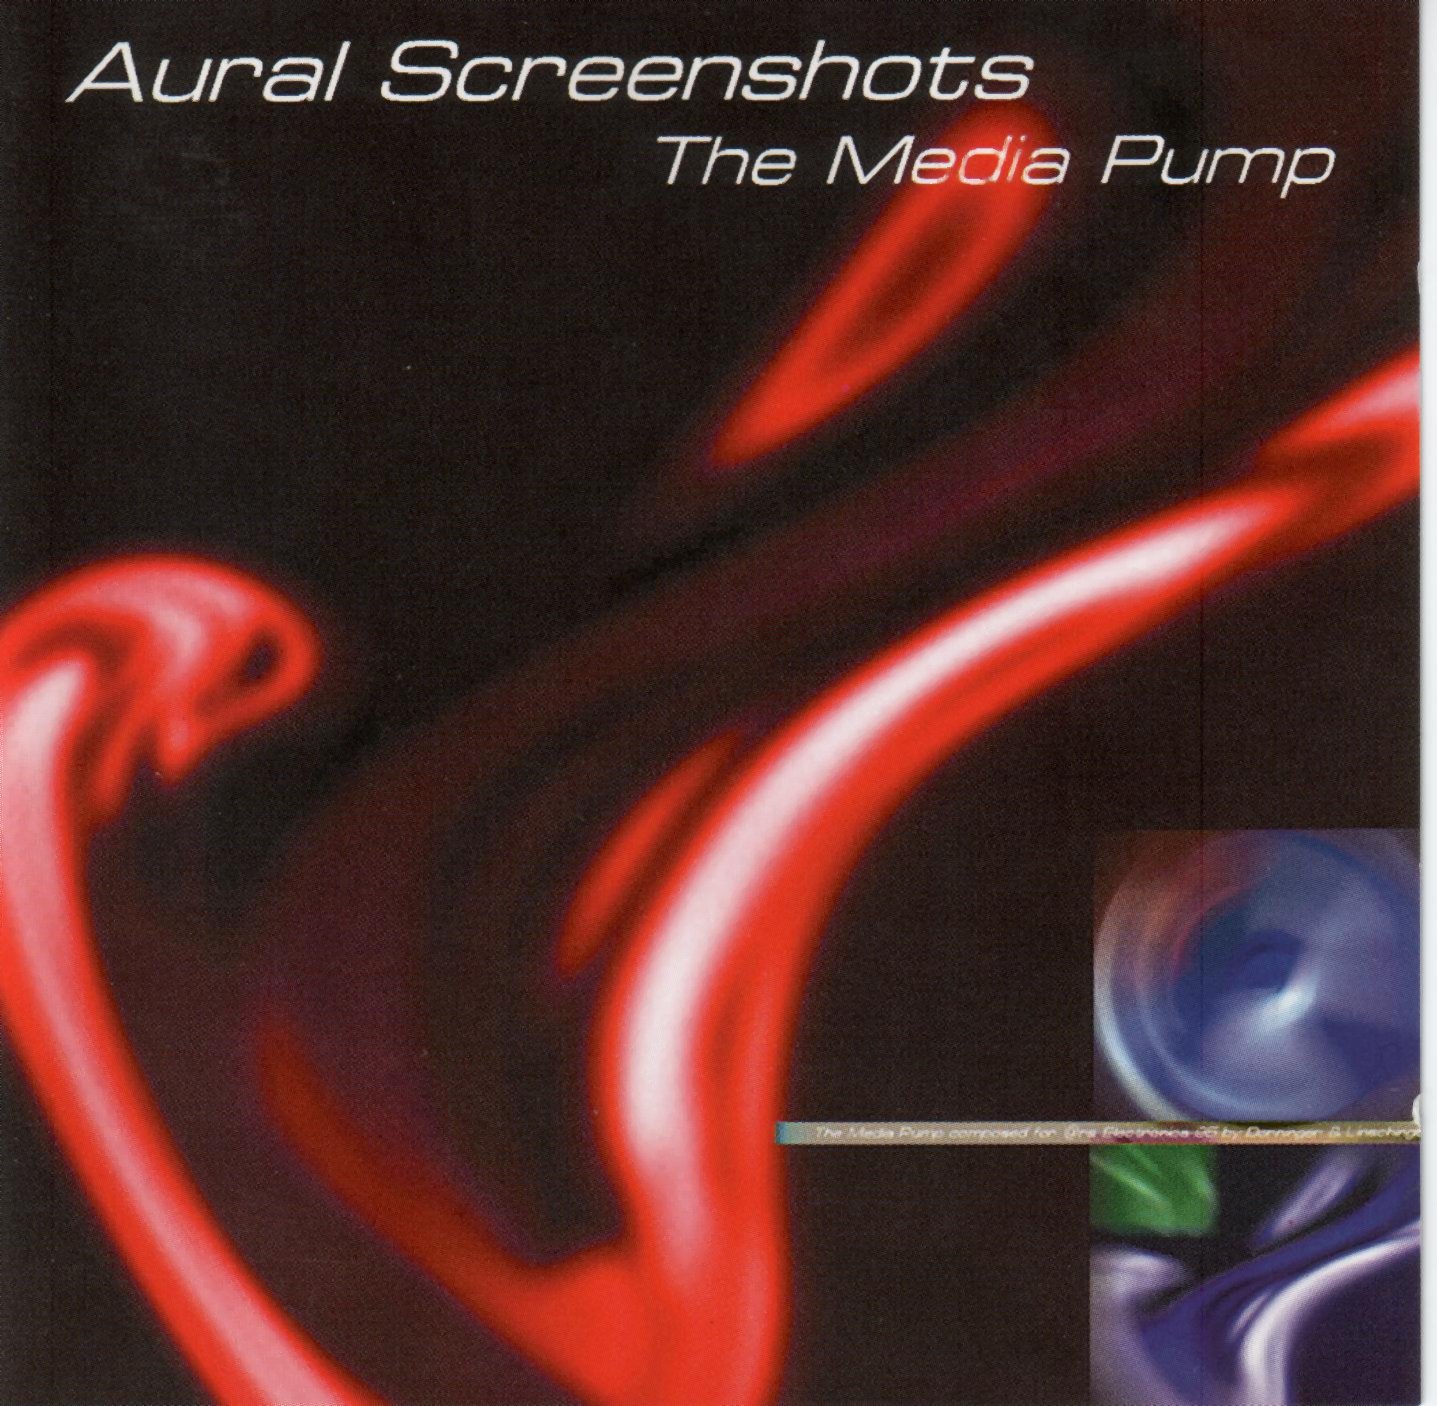 Live: Aural Screenshots at Ars Electronica 1995